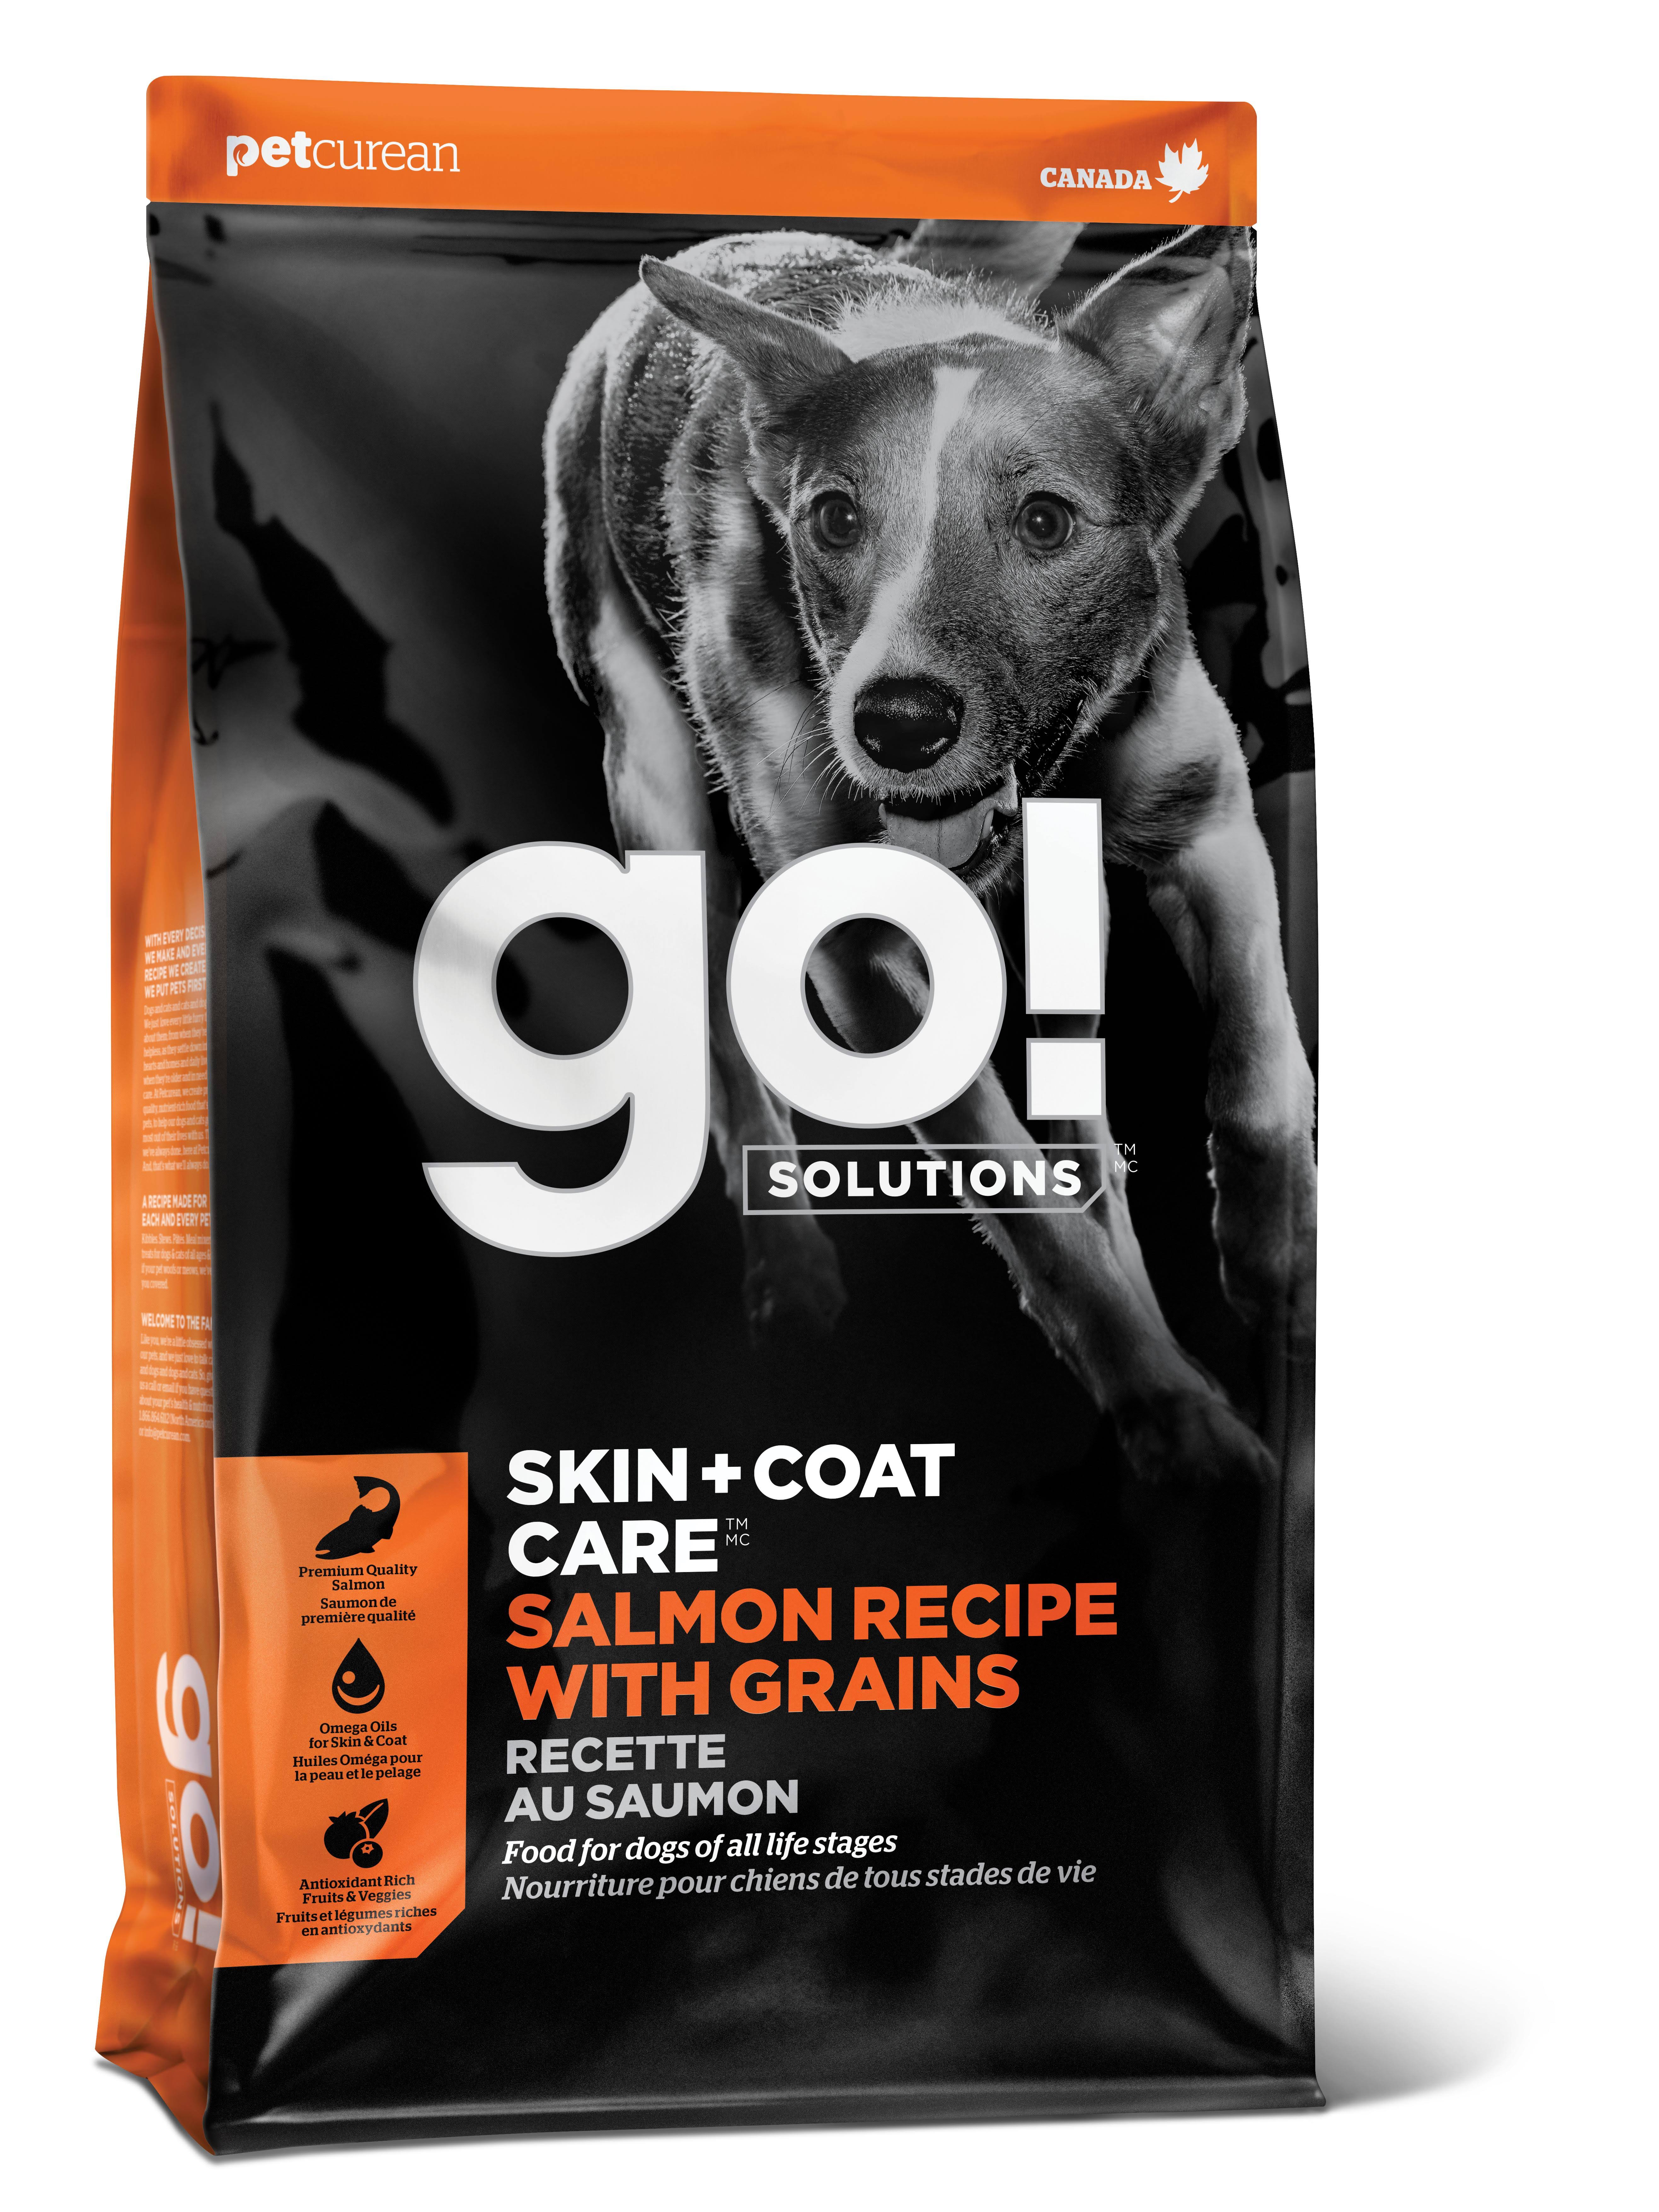 Go! Solutions Skin + Coat Care Salmon Recipe Dry Dog Food, 25 Pounds